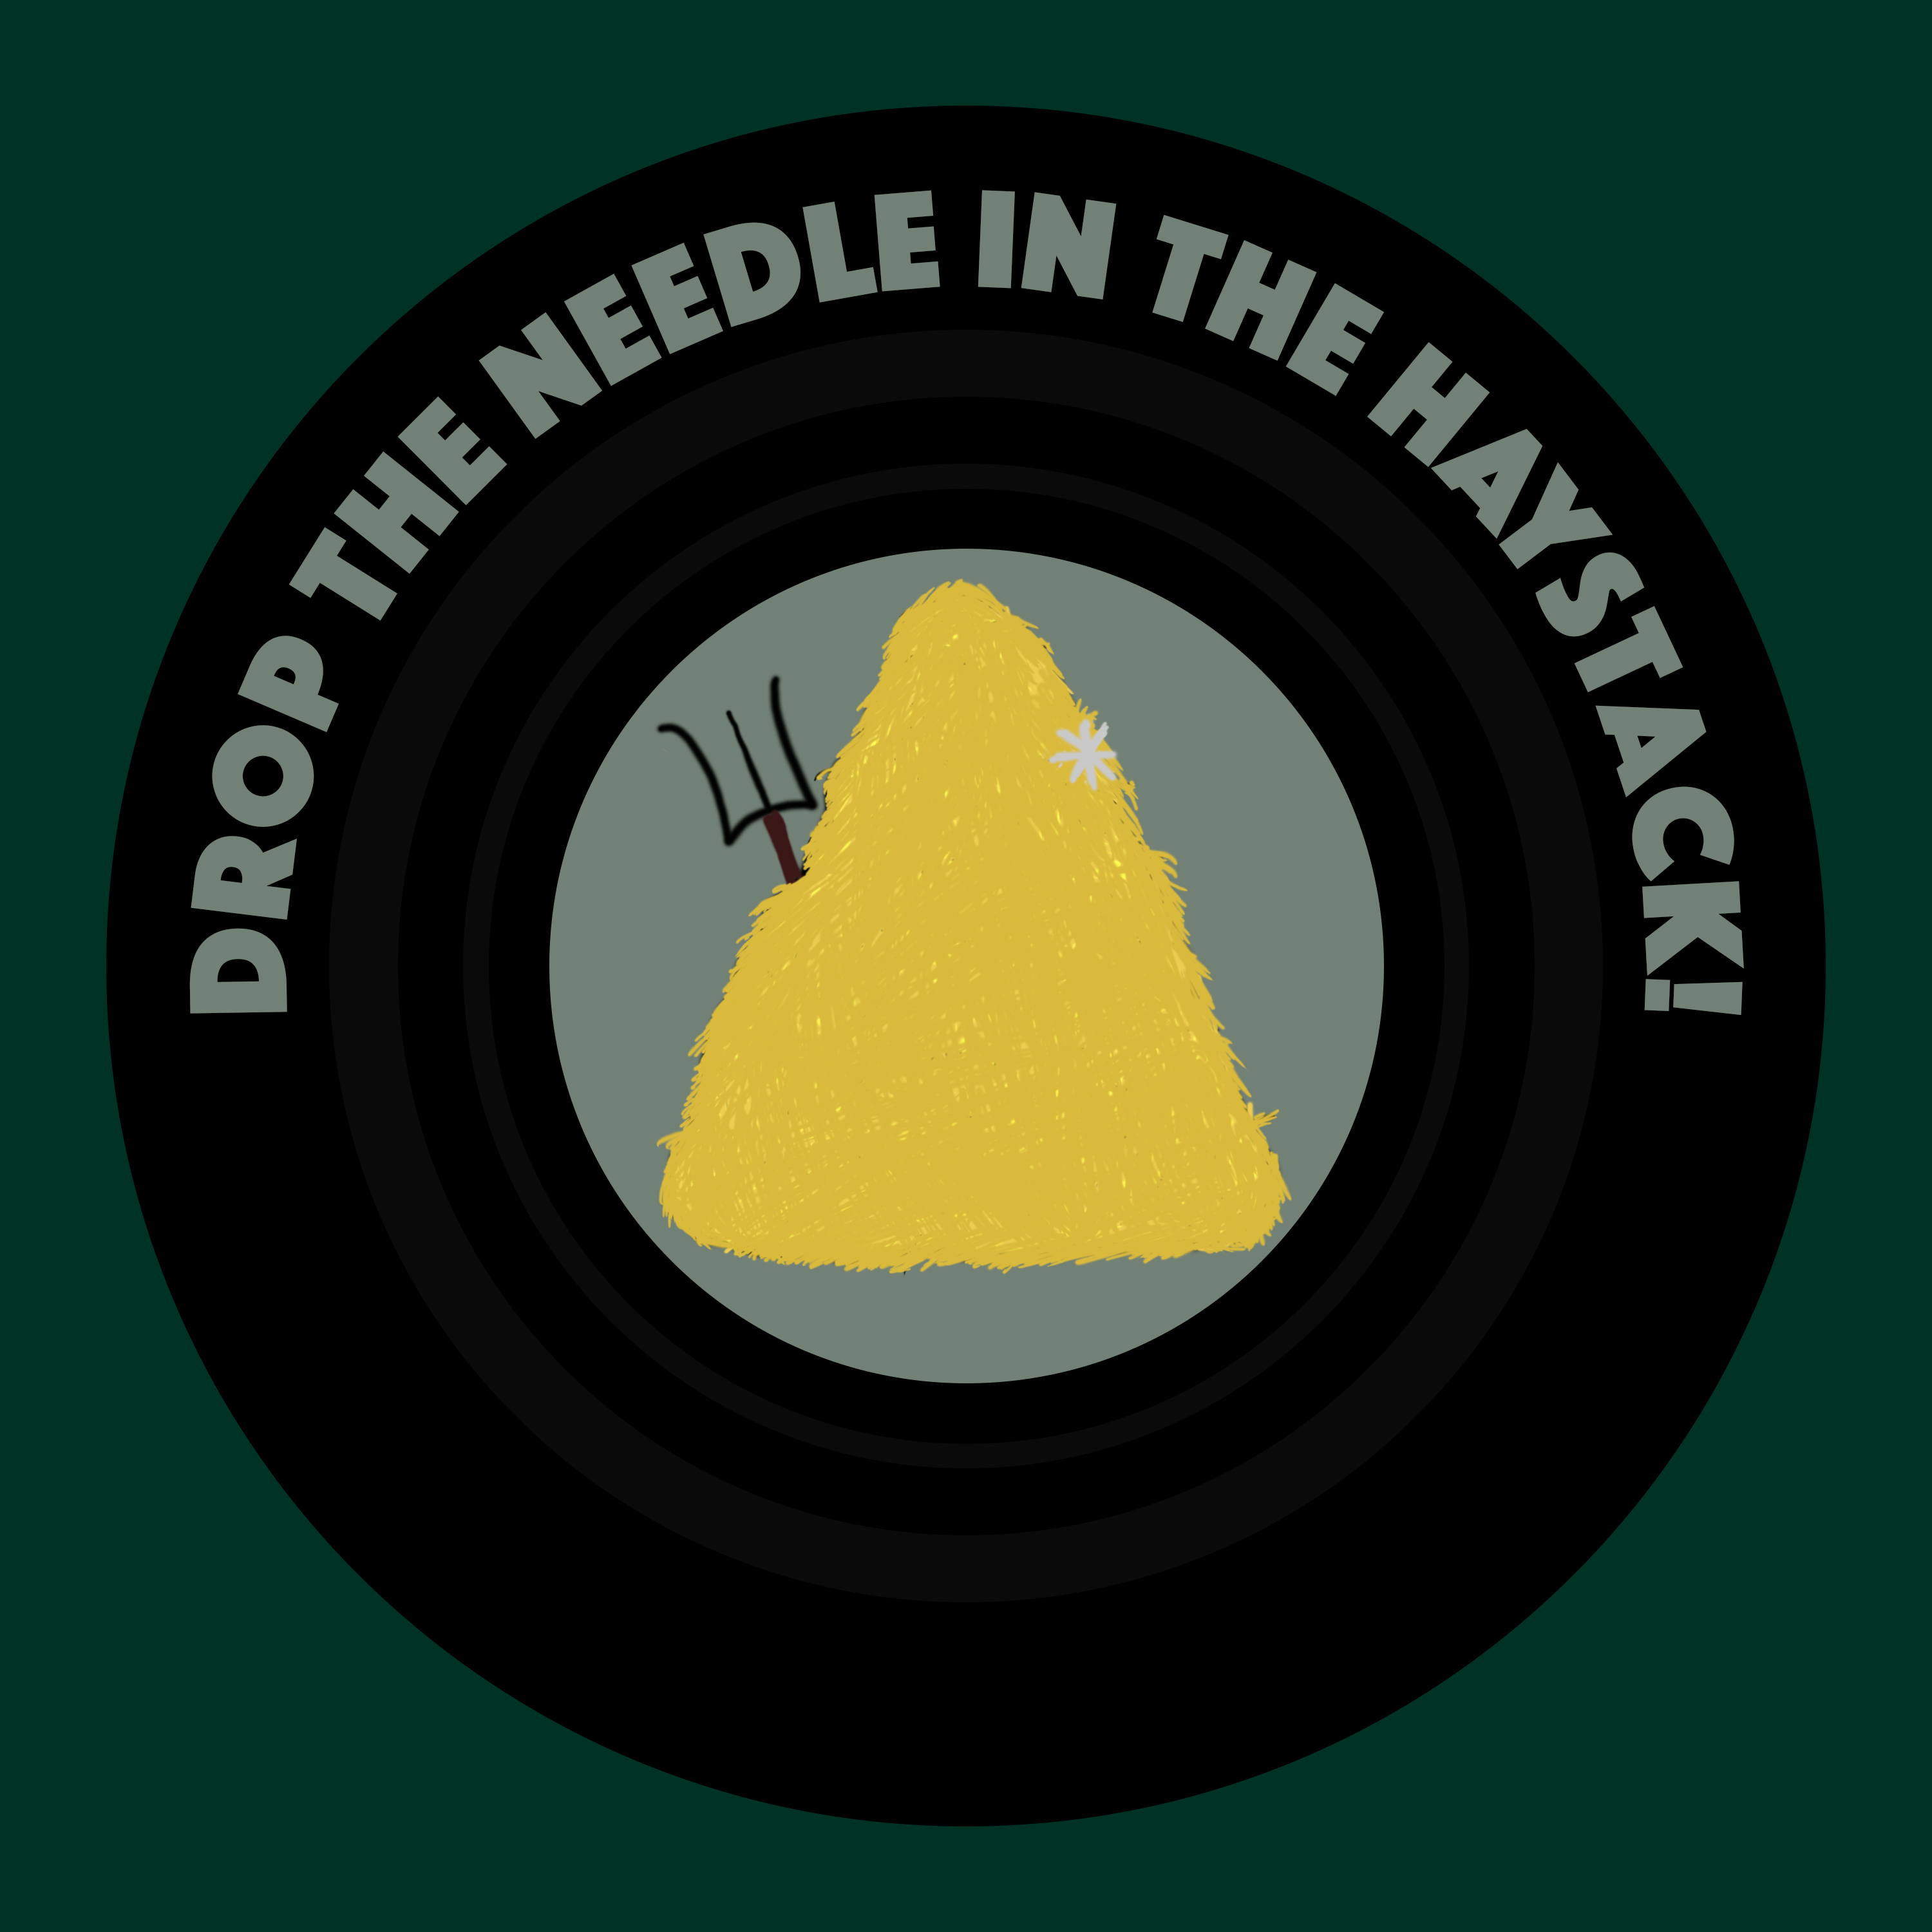 Drop the Needle in the Haystack!